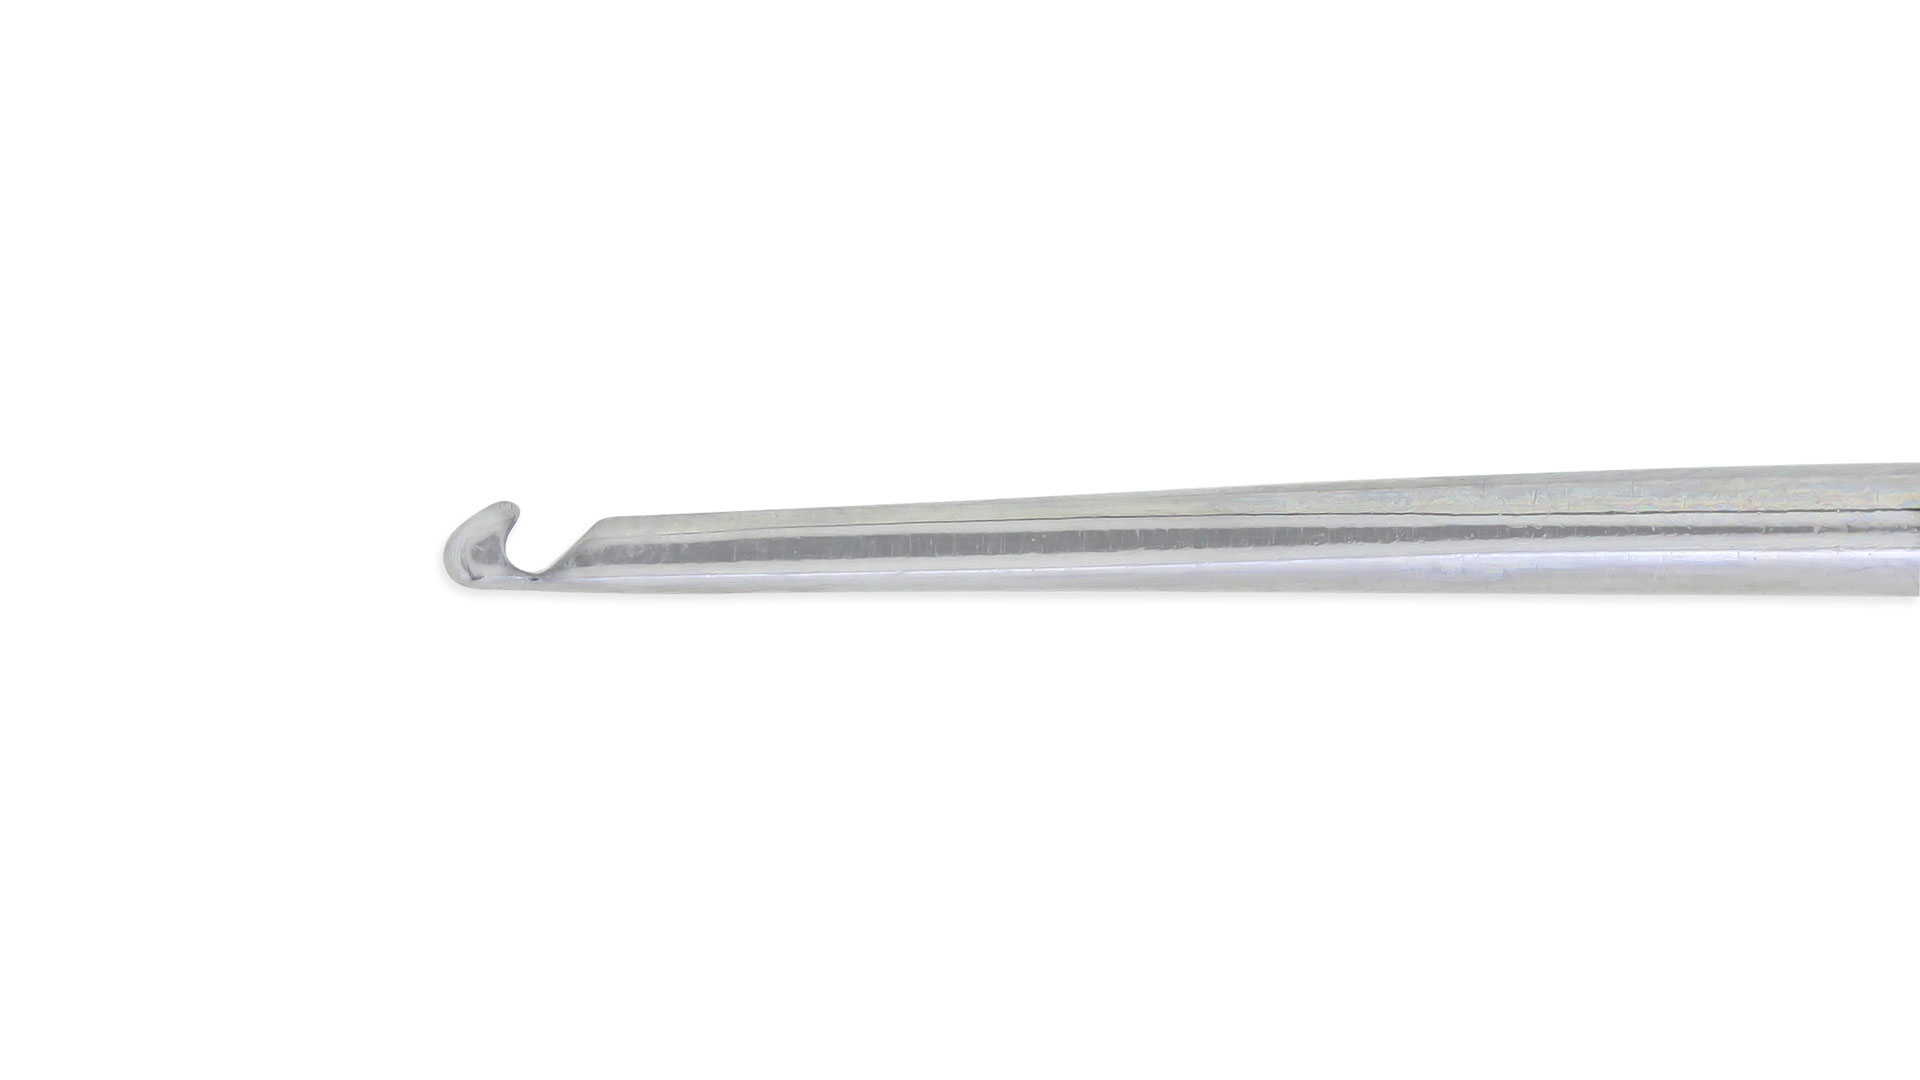 Double-Ended Phlebectomy Hook and Spatula - 1.4mm Hook/1.5mm Spatula